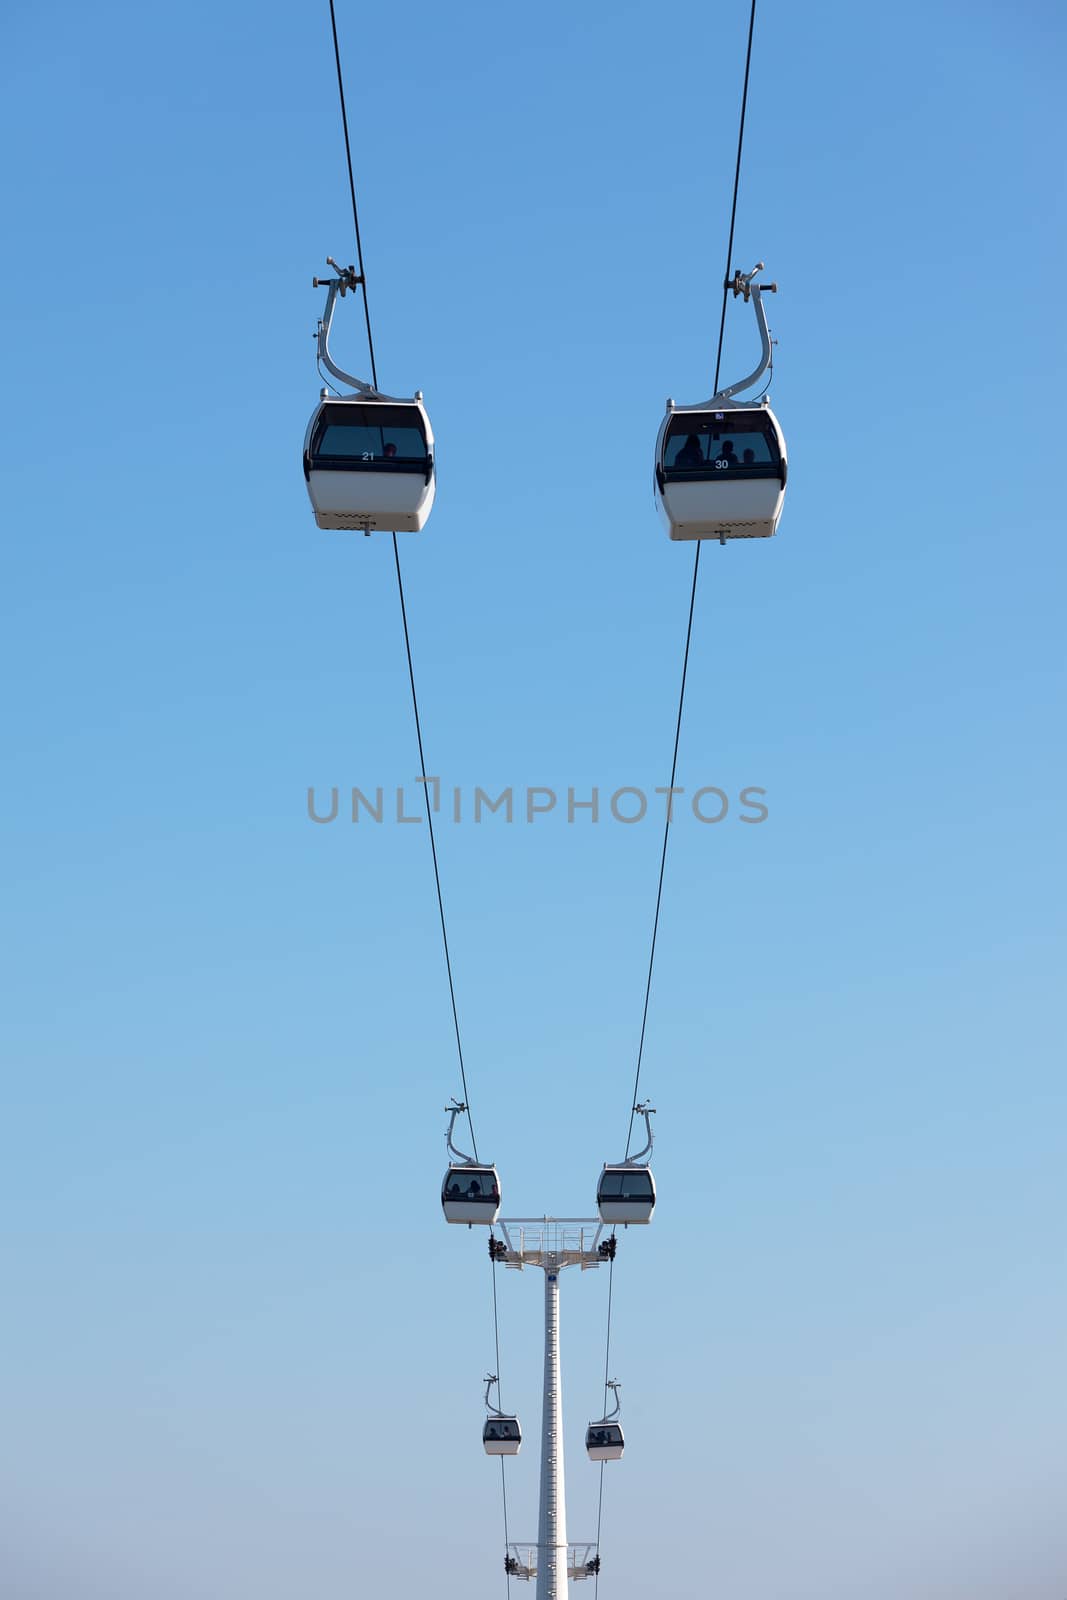 Cable car on blue sky background by Discovod